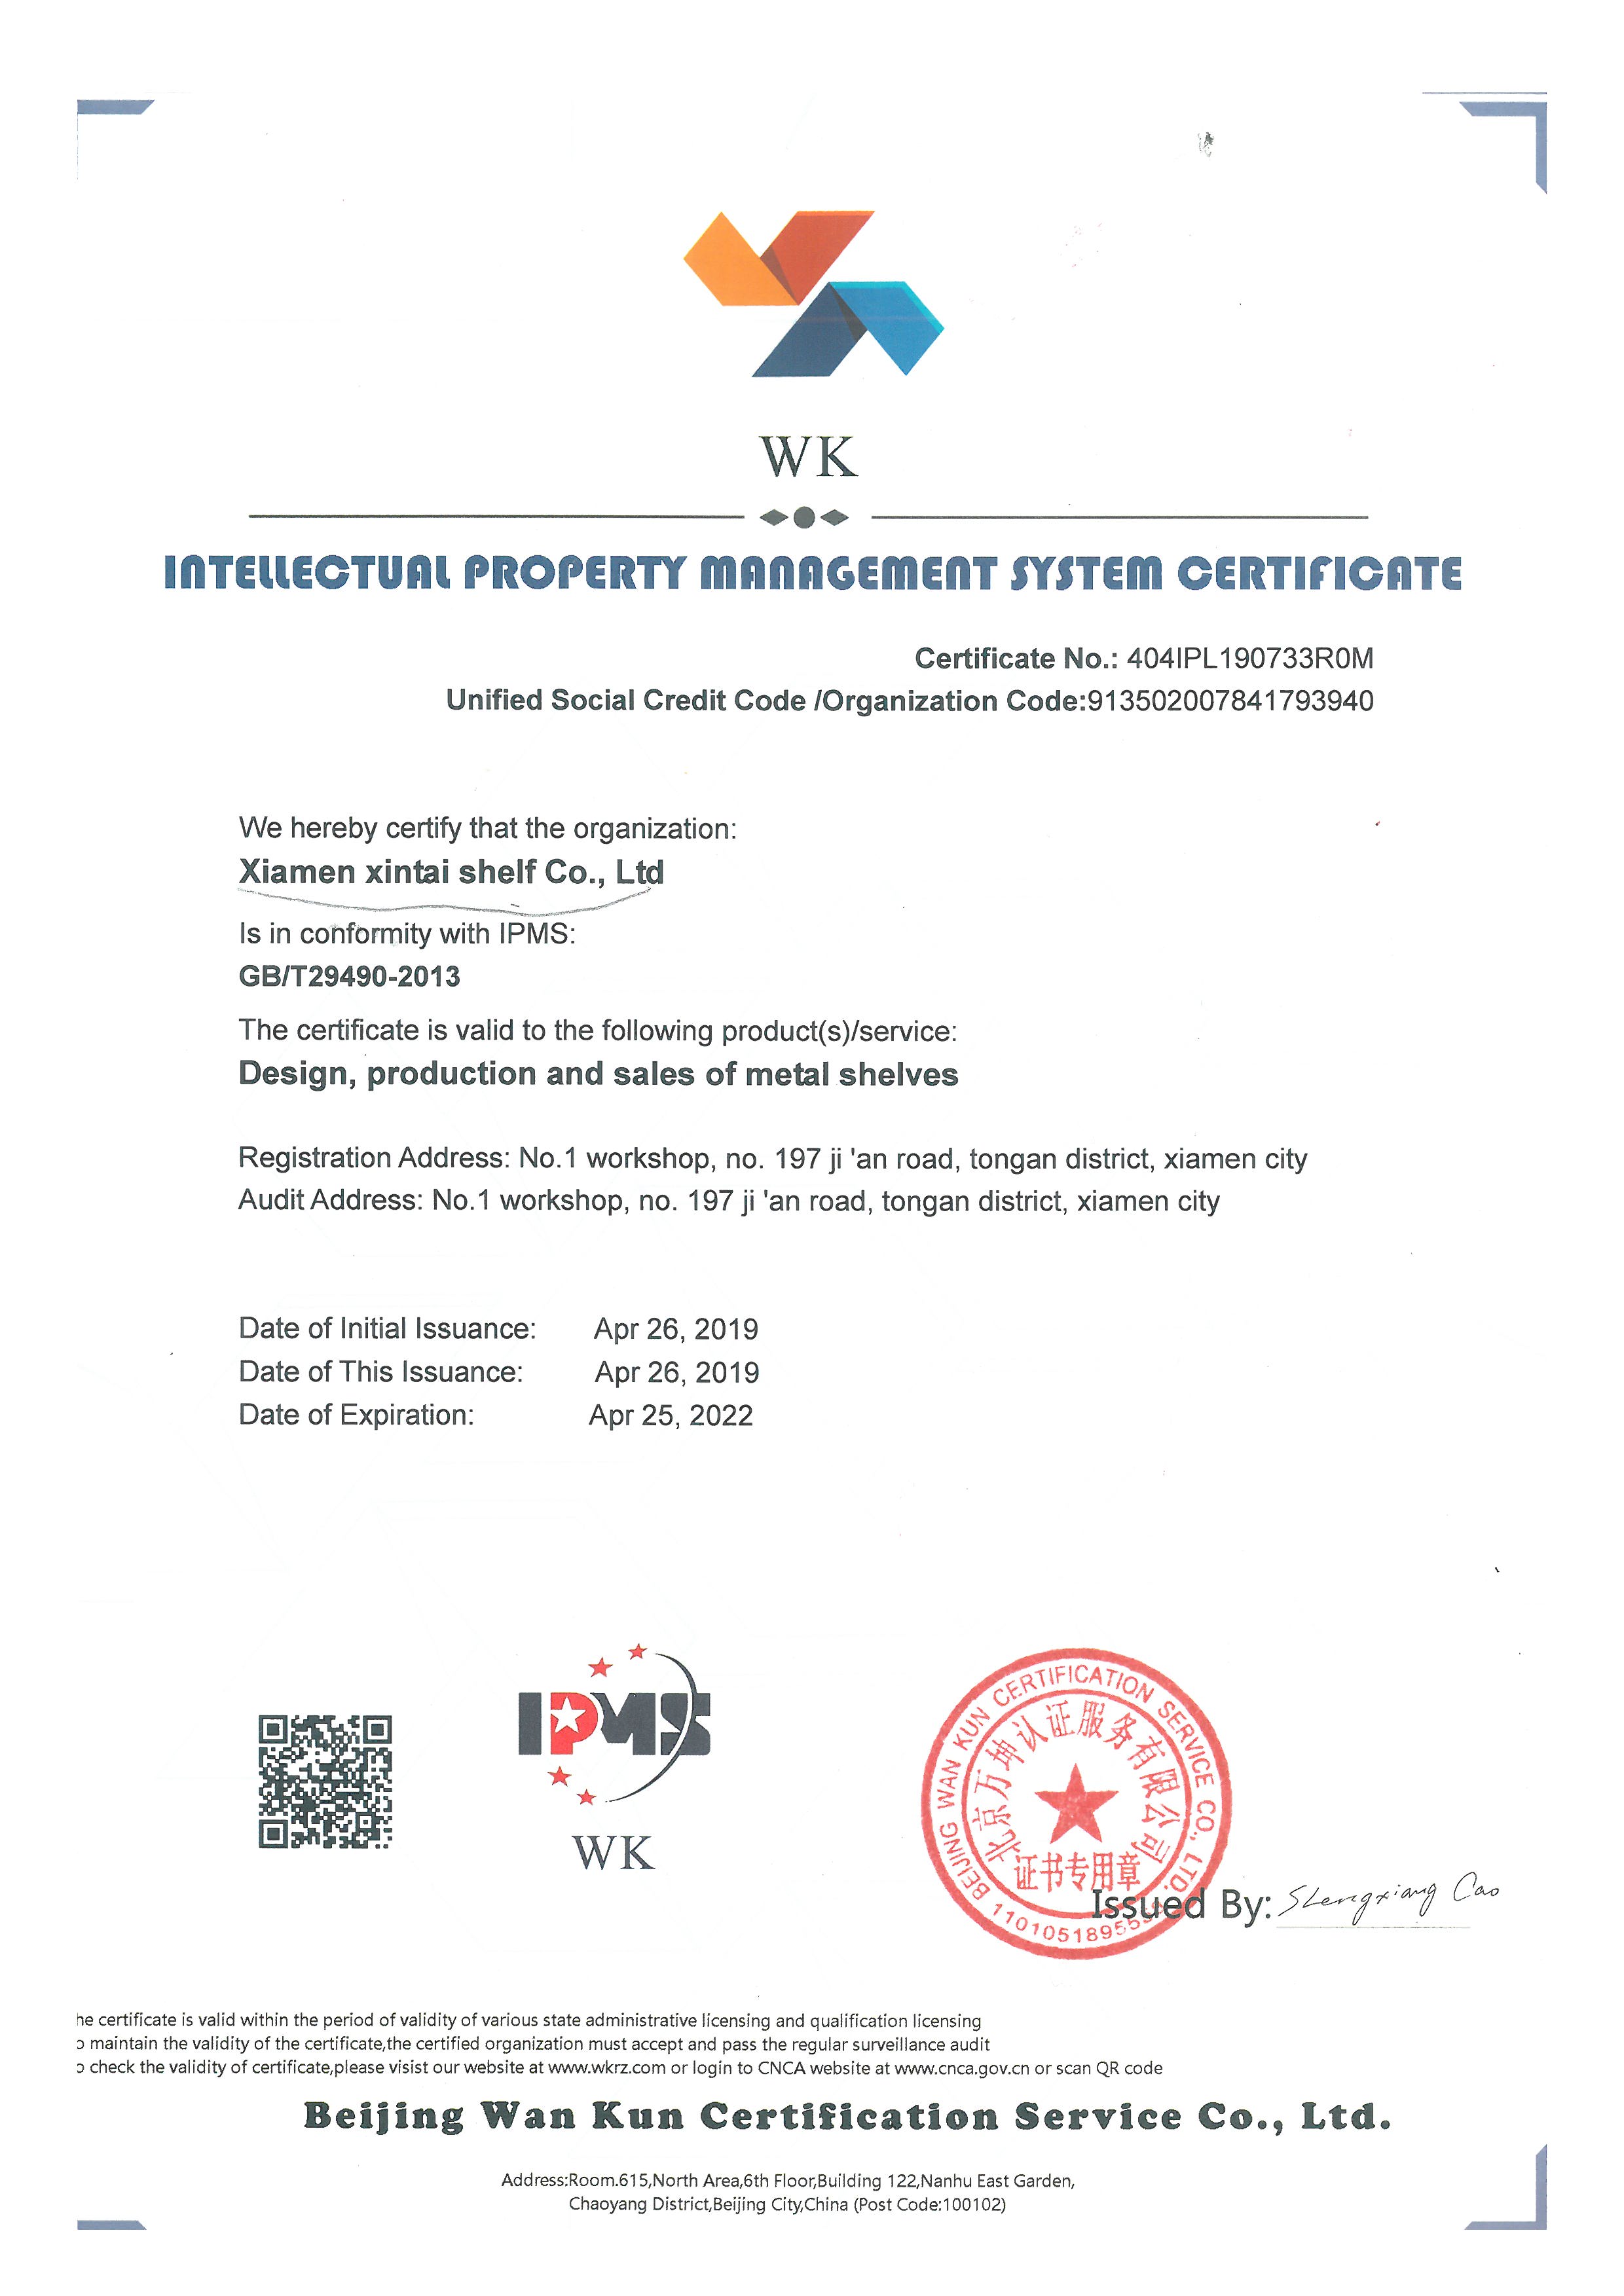 INTELLECTUAL PROPERTY MANAGEMENT SYSTEM CERTIFICATE